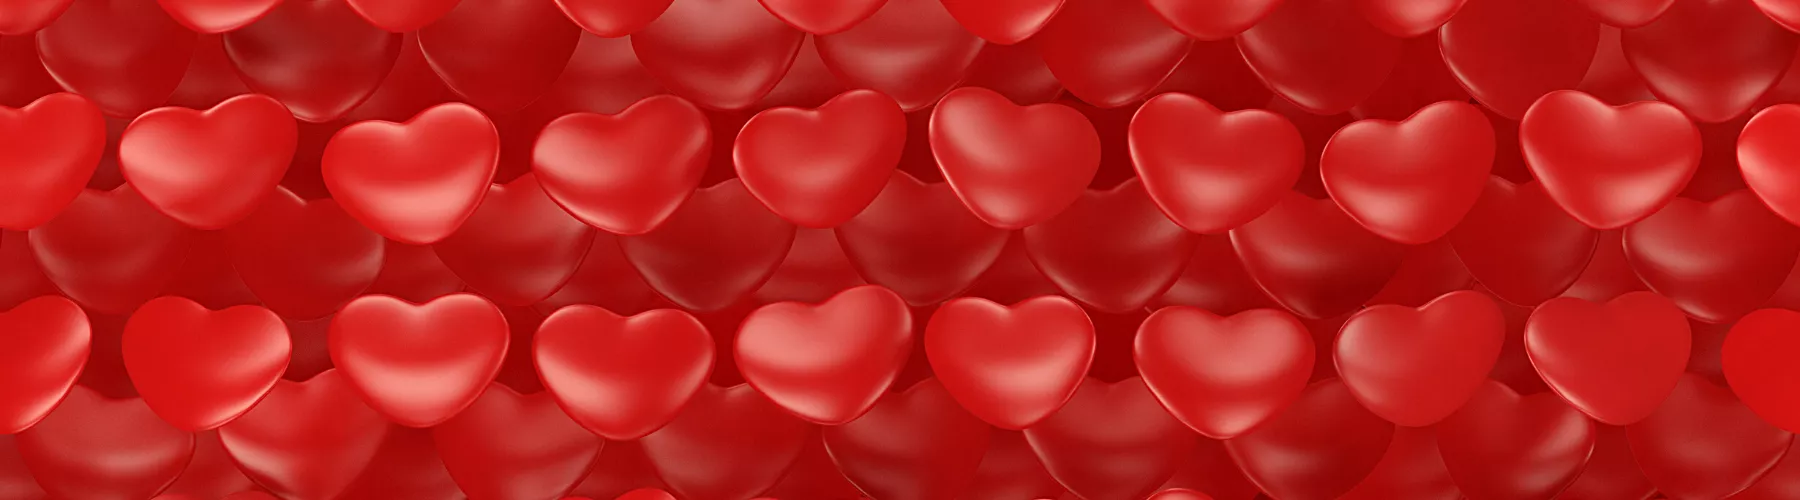 Banner image heart-shaped cells